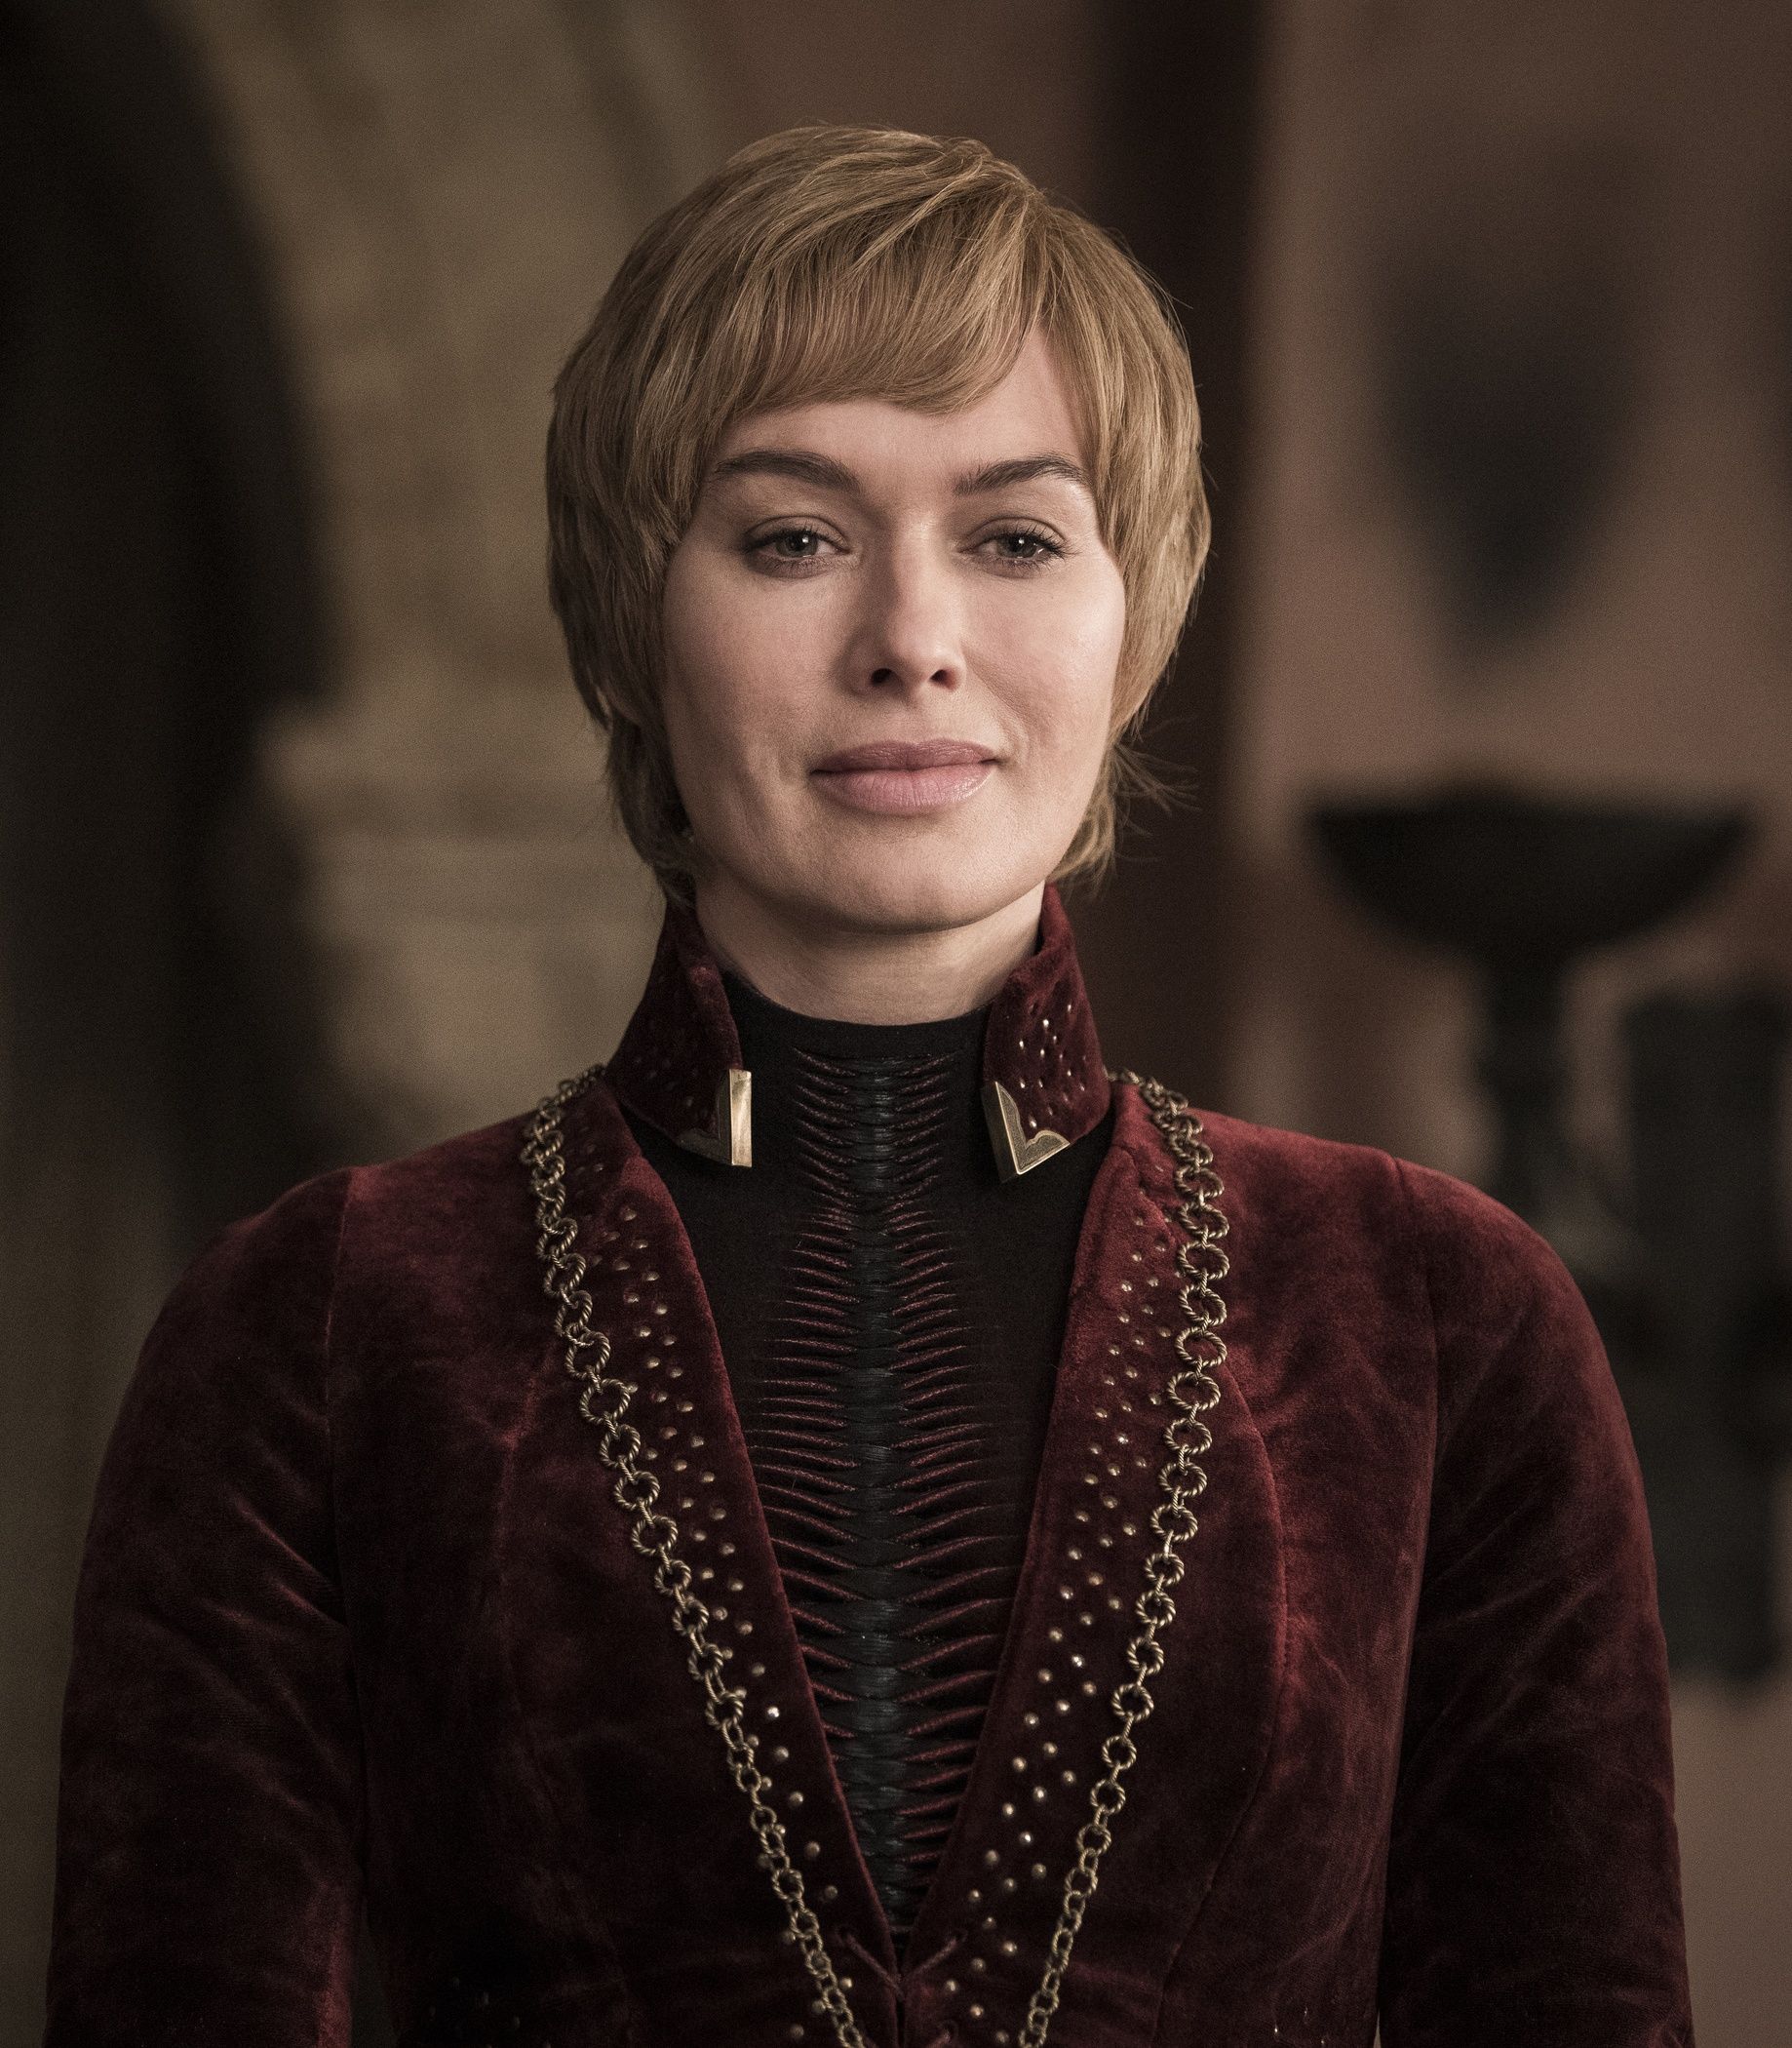 Lena Headey as Cersei Lannister in Game of Thrones Vertical TLDR